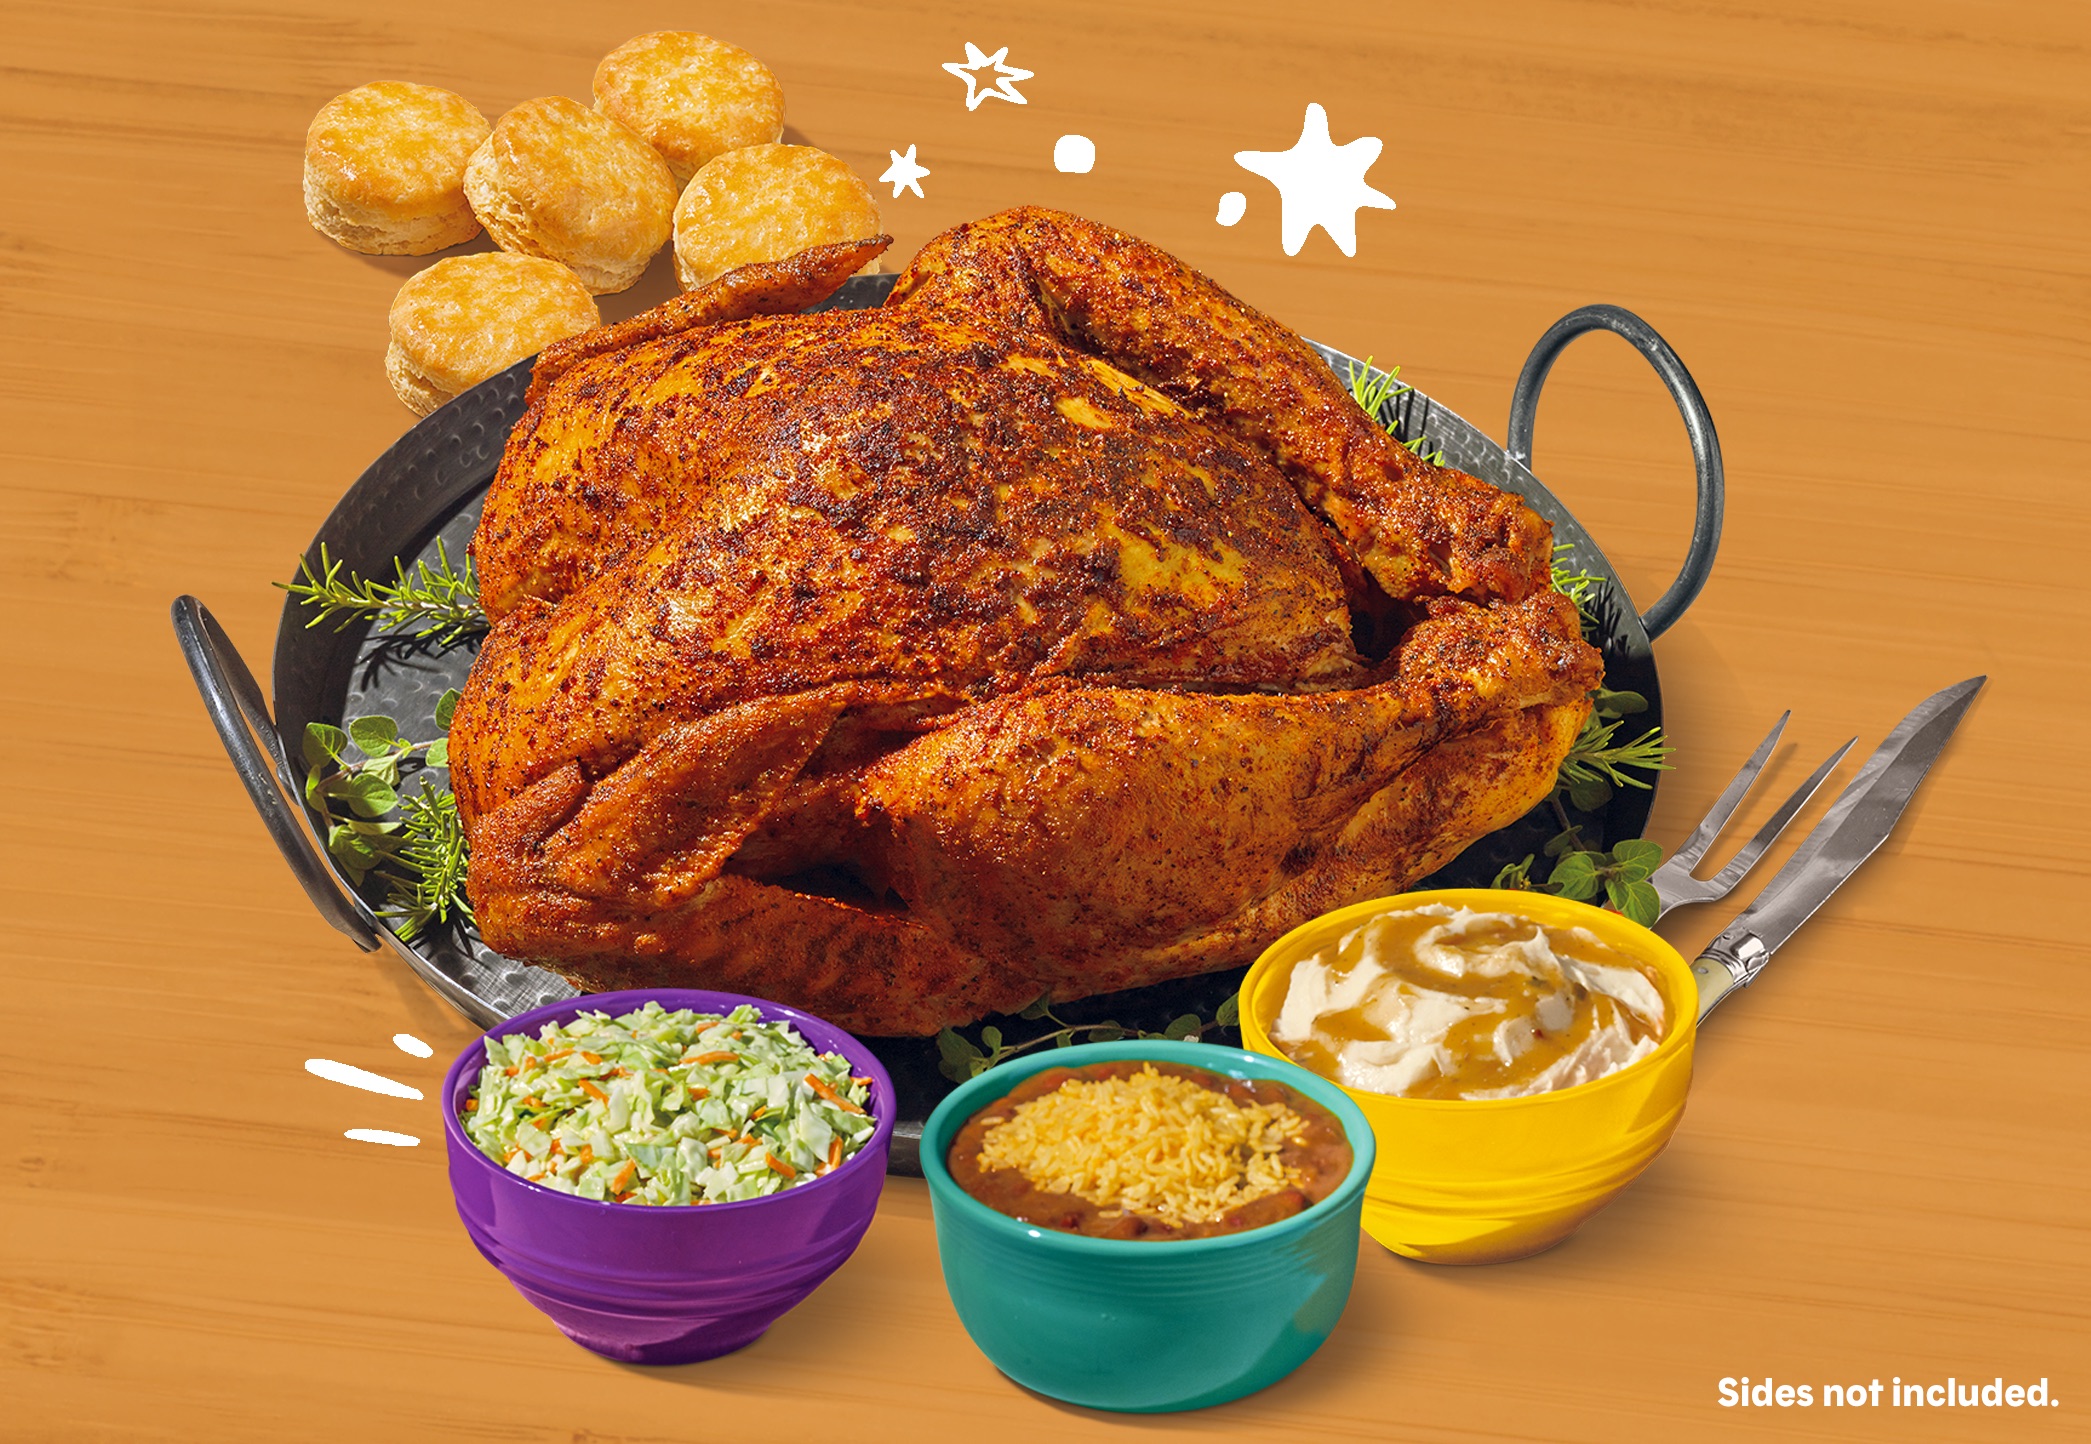 PHOTO: The Cajun-style turkey from Popeyes.